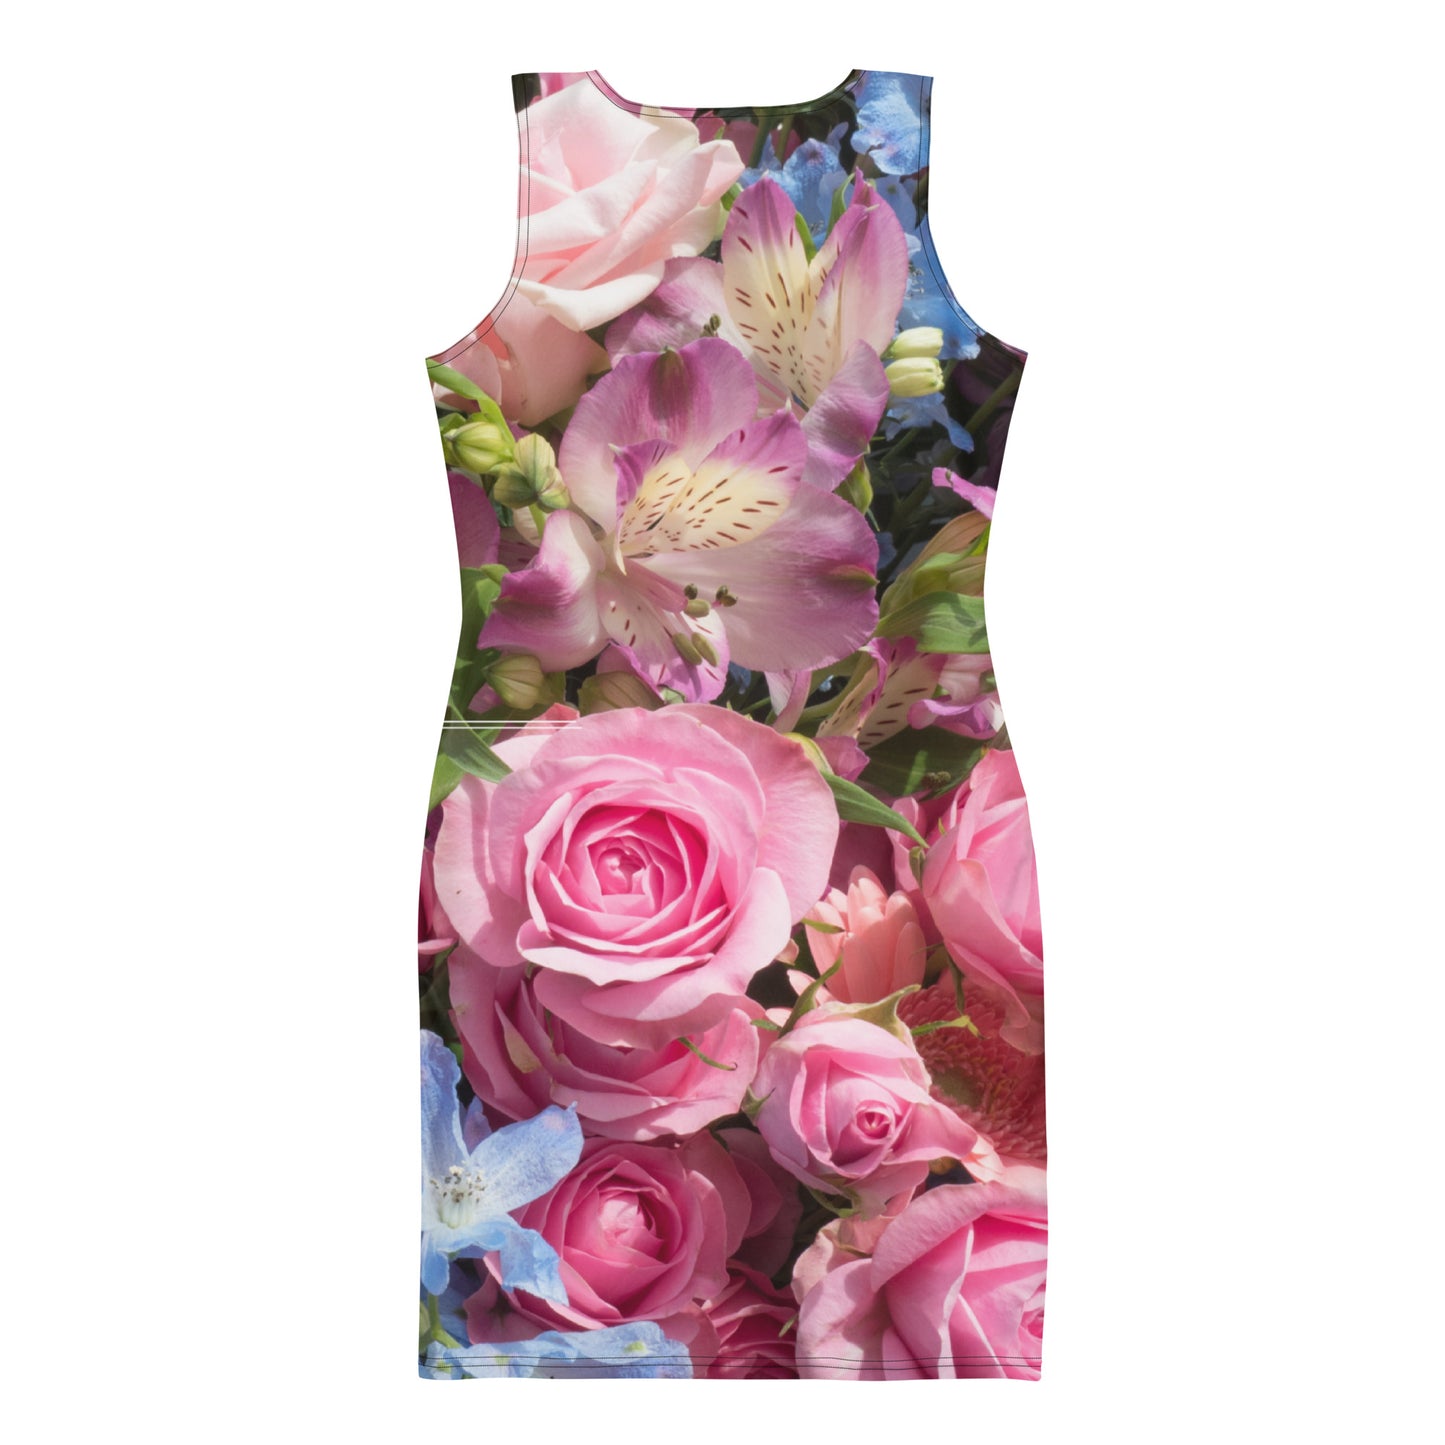 Bodycon dress - Pink and Blue Flowers